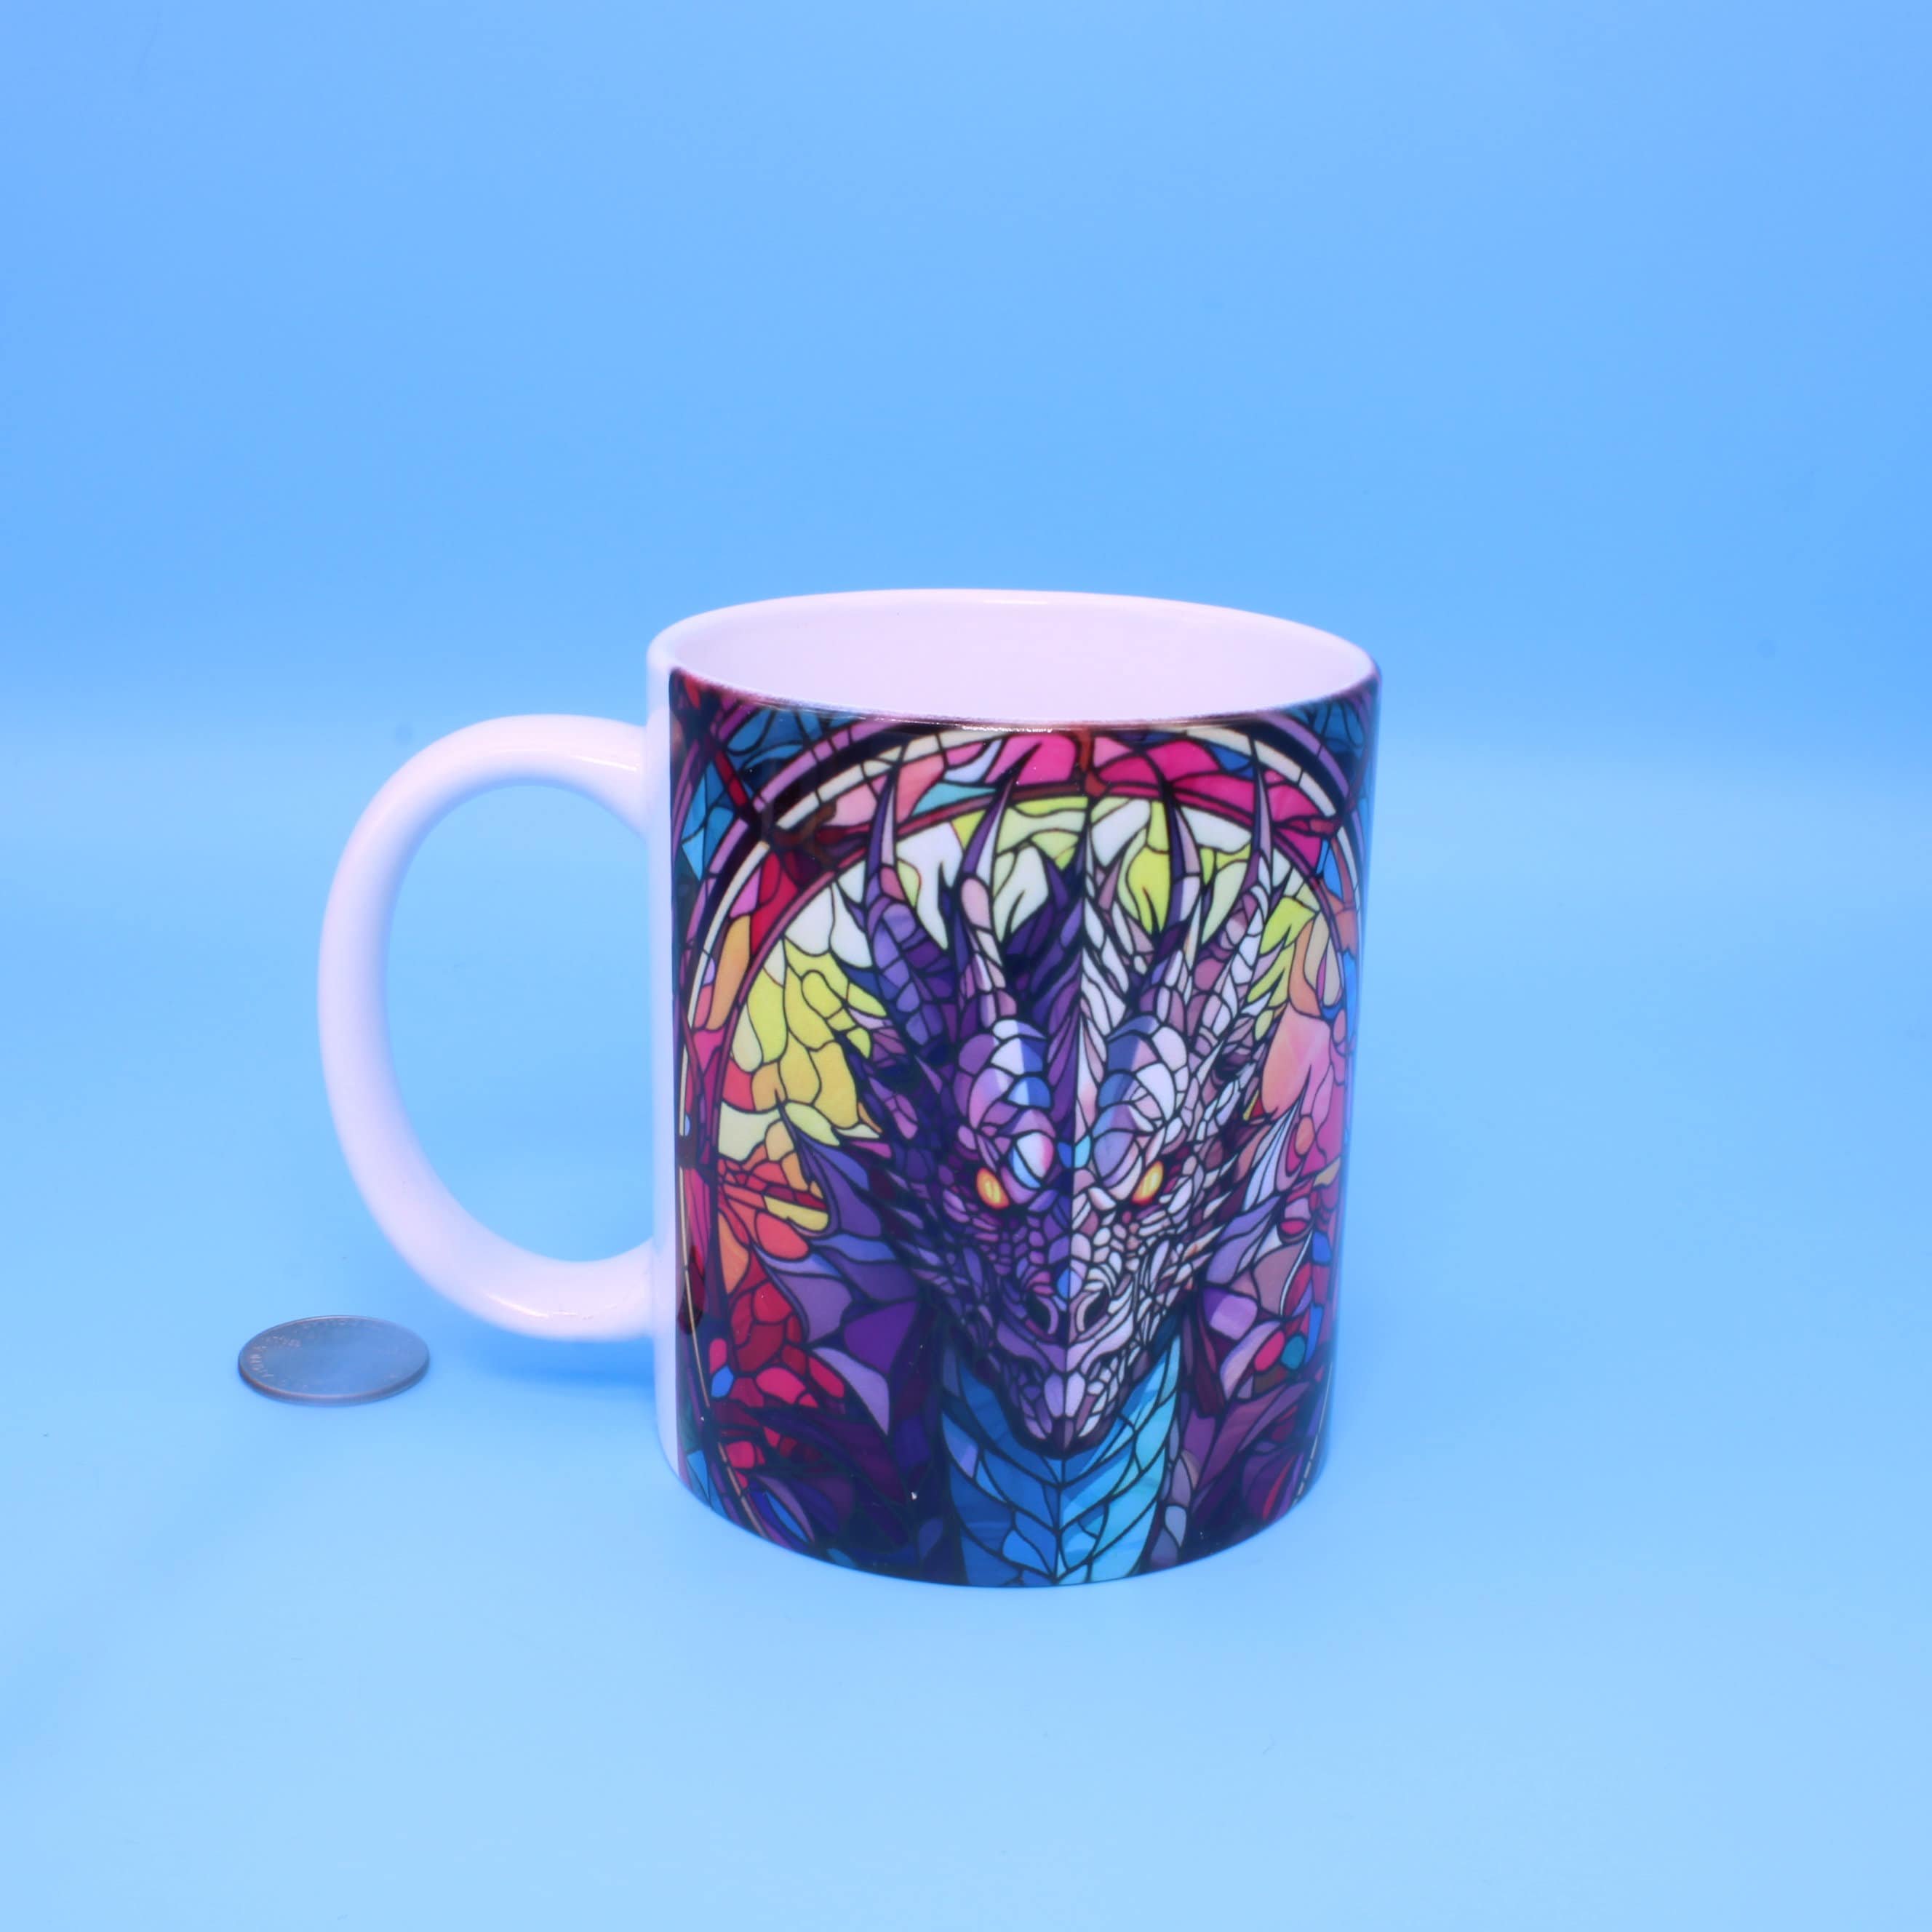 Dragon "Stained Glass" Ceramic Mug - Hot chocolate | Coffee | Hot Tea 11 0z. Perfect gift!